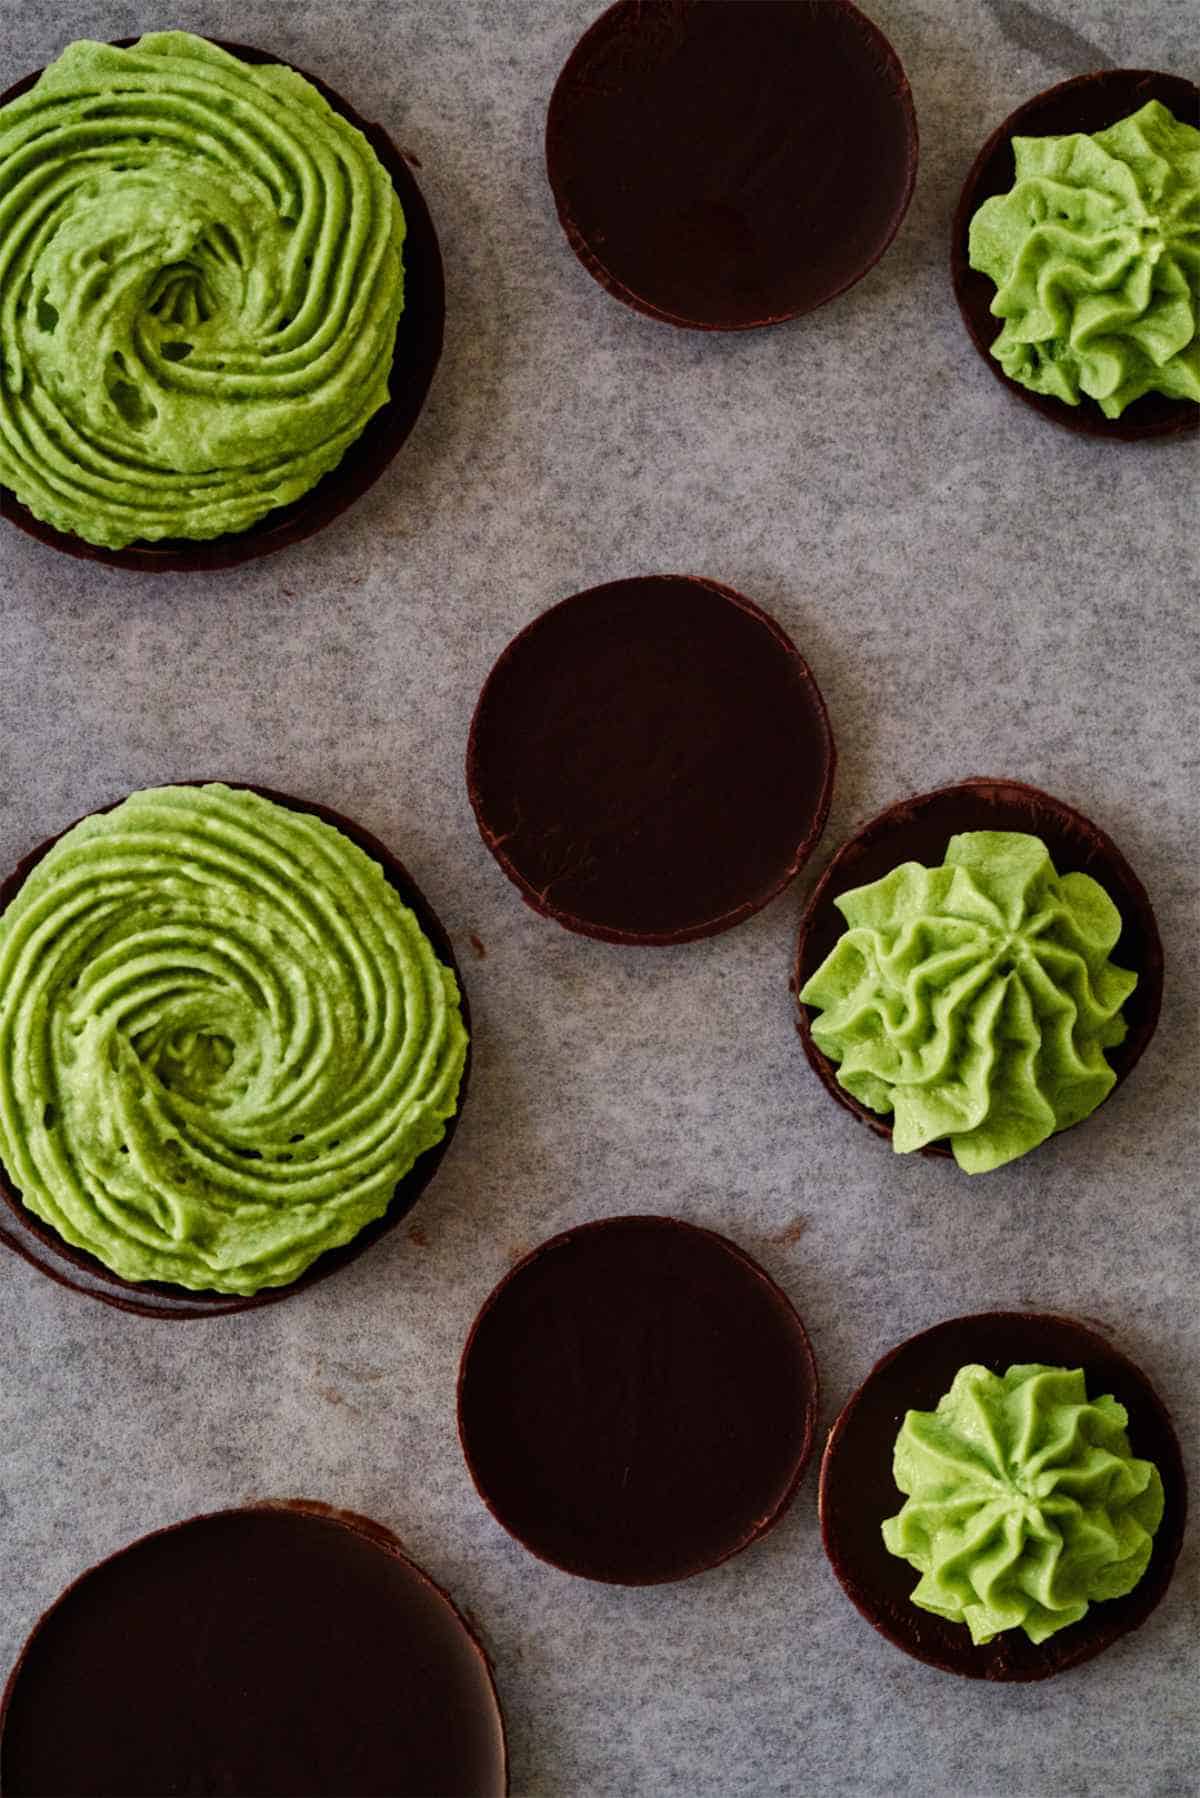 Chocolate discs topped with green piping.